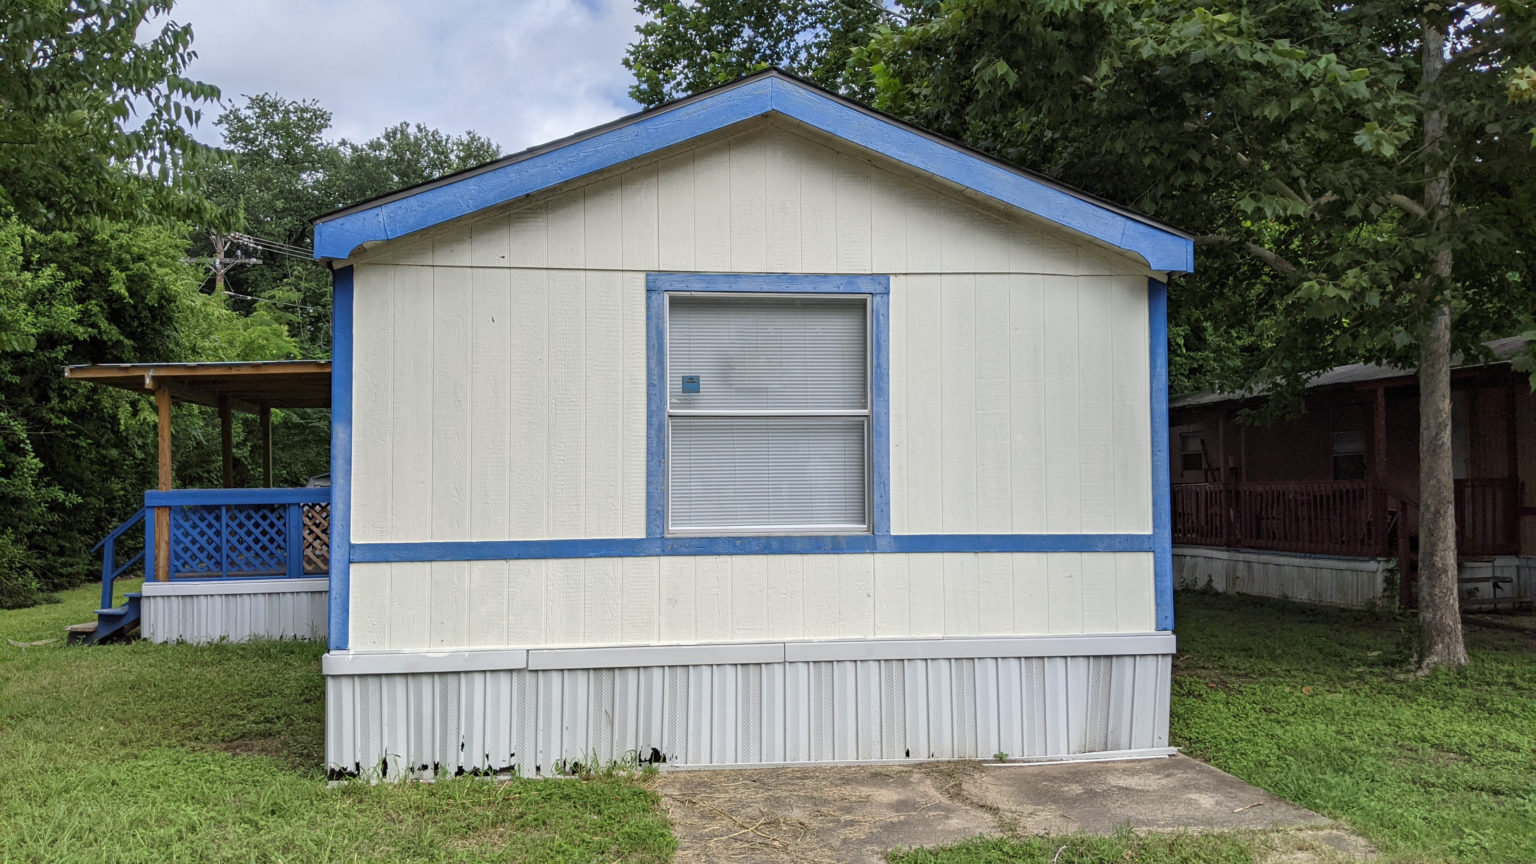 Update: Mobile Home Fix Up, Book Feature and Podcast Awards